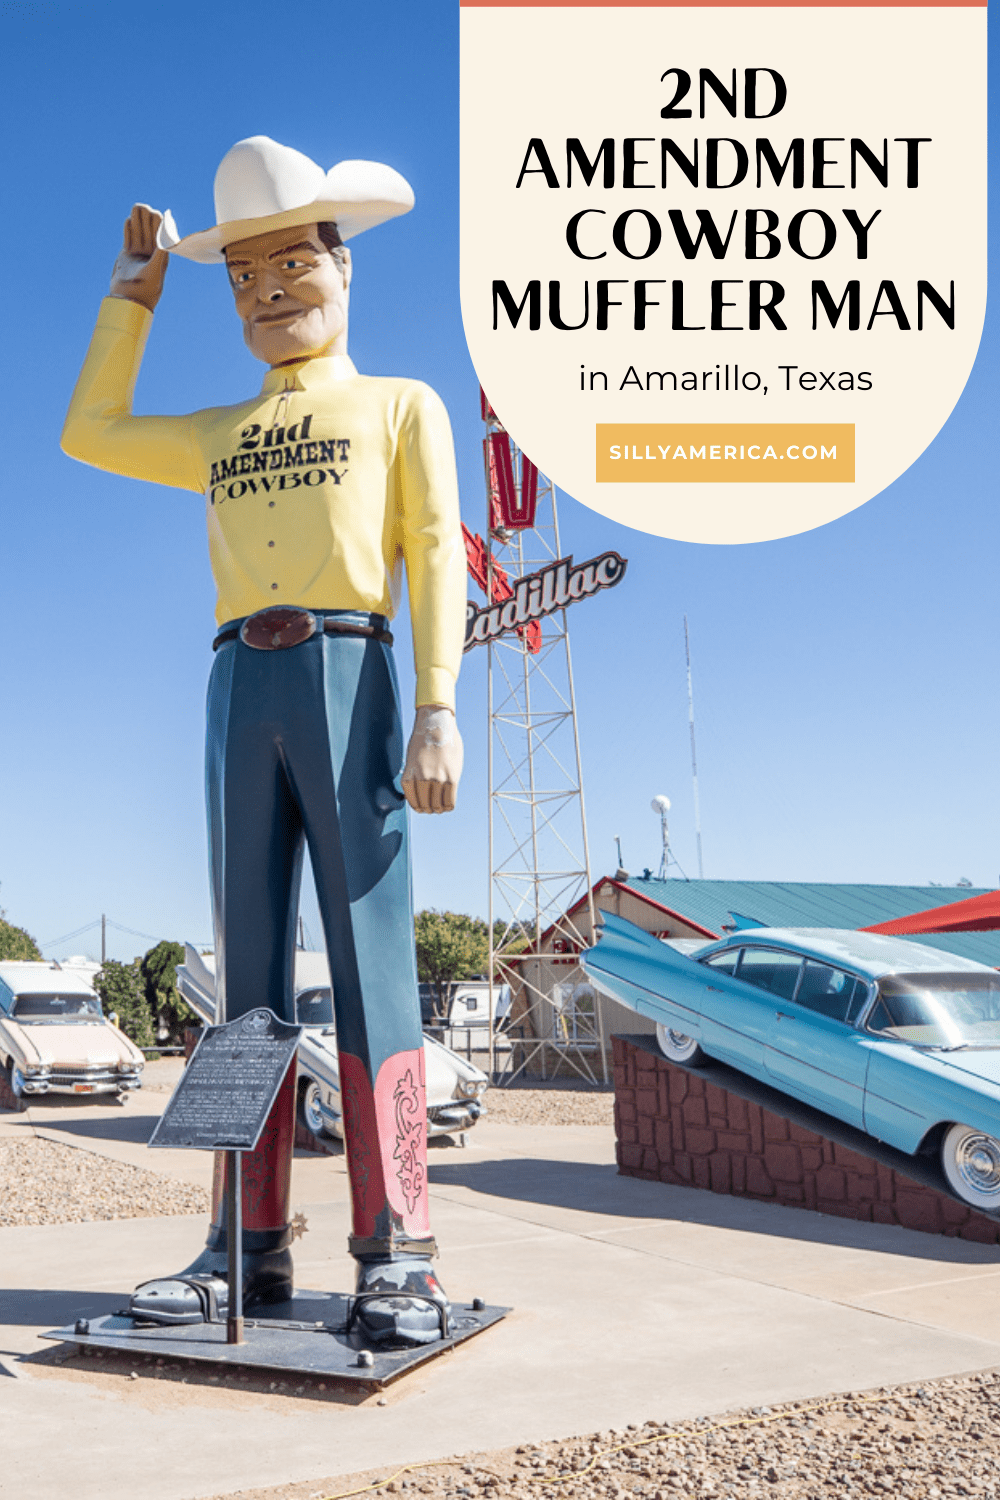 The 2nd Amendment Cowboy muffler man is a roadside attraction in Amarillo, Texas. It's hard to miss this giant man with a controversial message, located just down the road from the famed Cadillac Ranch on Route 66.  #RoadTrips #RoadTripStop #Route66 #Route66RoadTrip #TexasRoute66 #Texas #TexasRoadTrip #TexasRoadsideAttractions #RoadsideAttractions #RoadsideAttraction #RoadsideAmerica #RoadTrip #MufflerMan